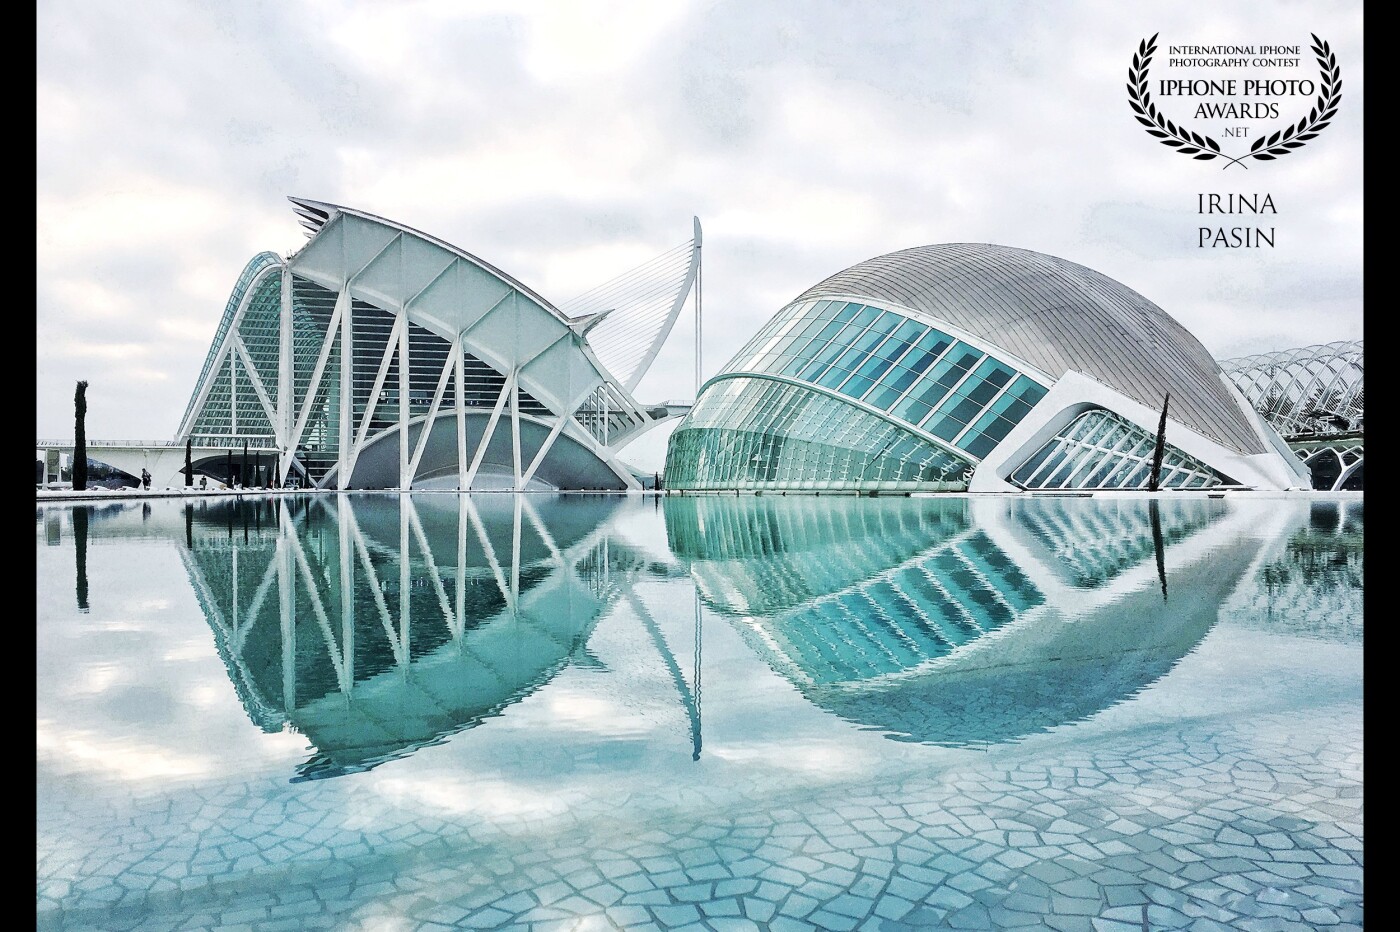 The stunning modern architecture of Valencia reflected for perfect symmetry. If you visit Valencia, allocate at least a day to spend around these buildings. 